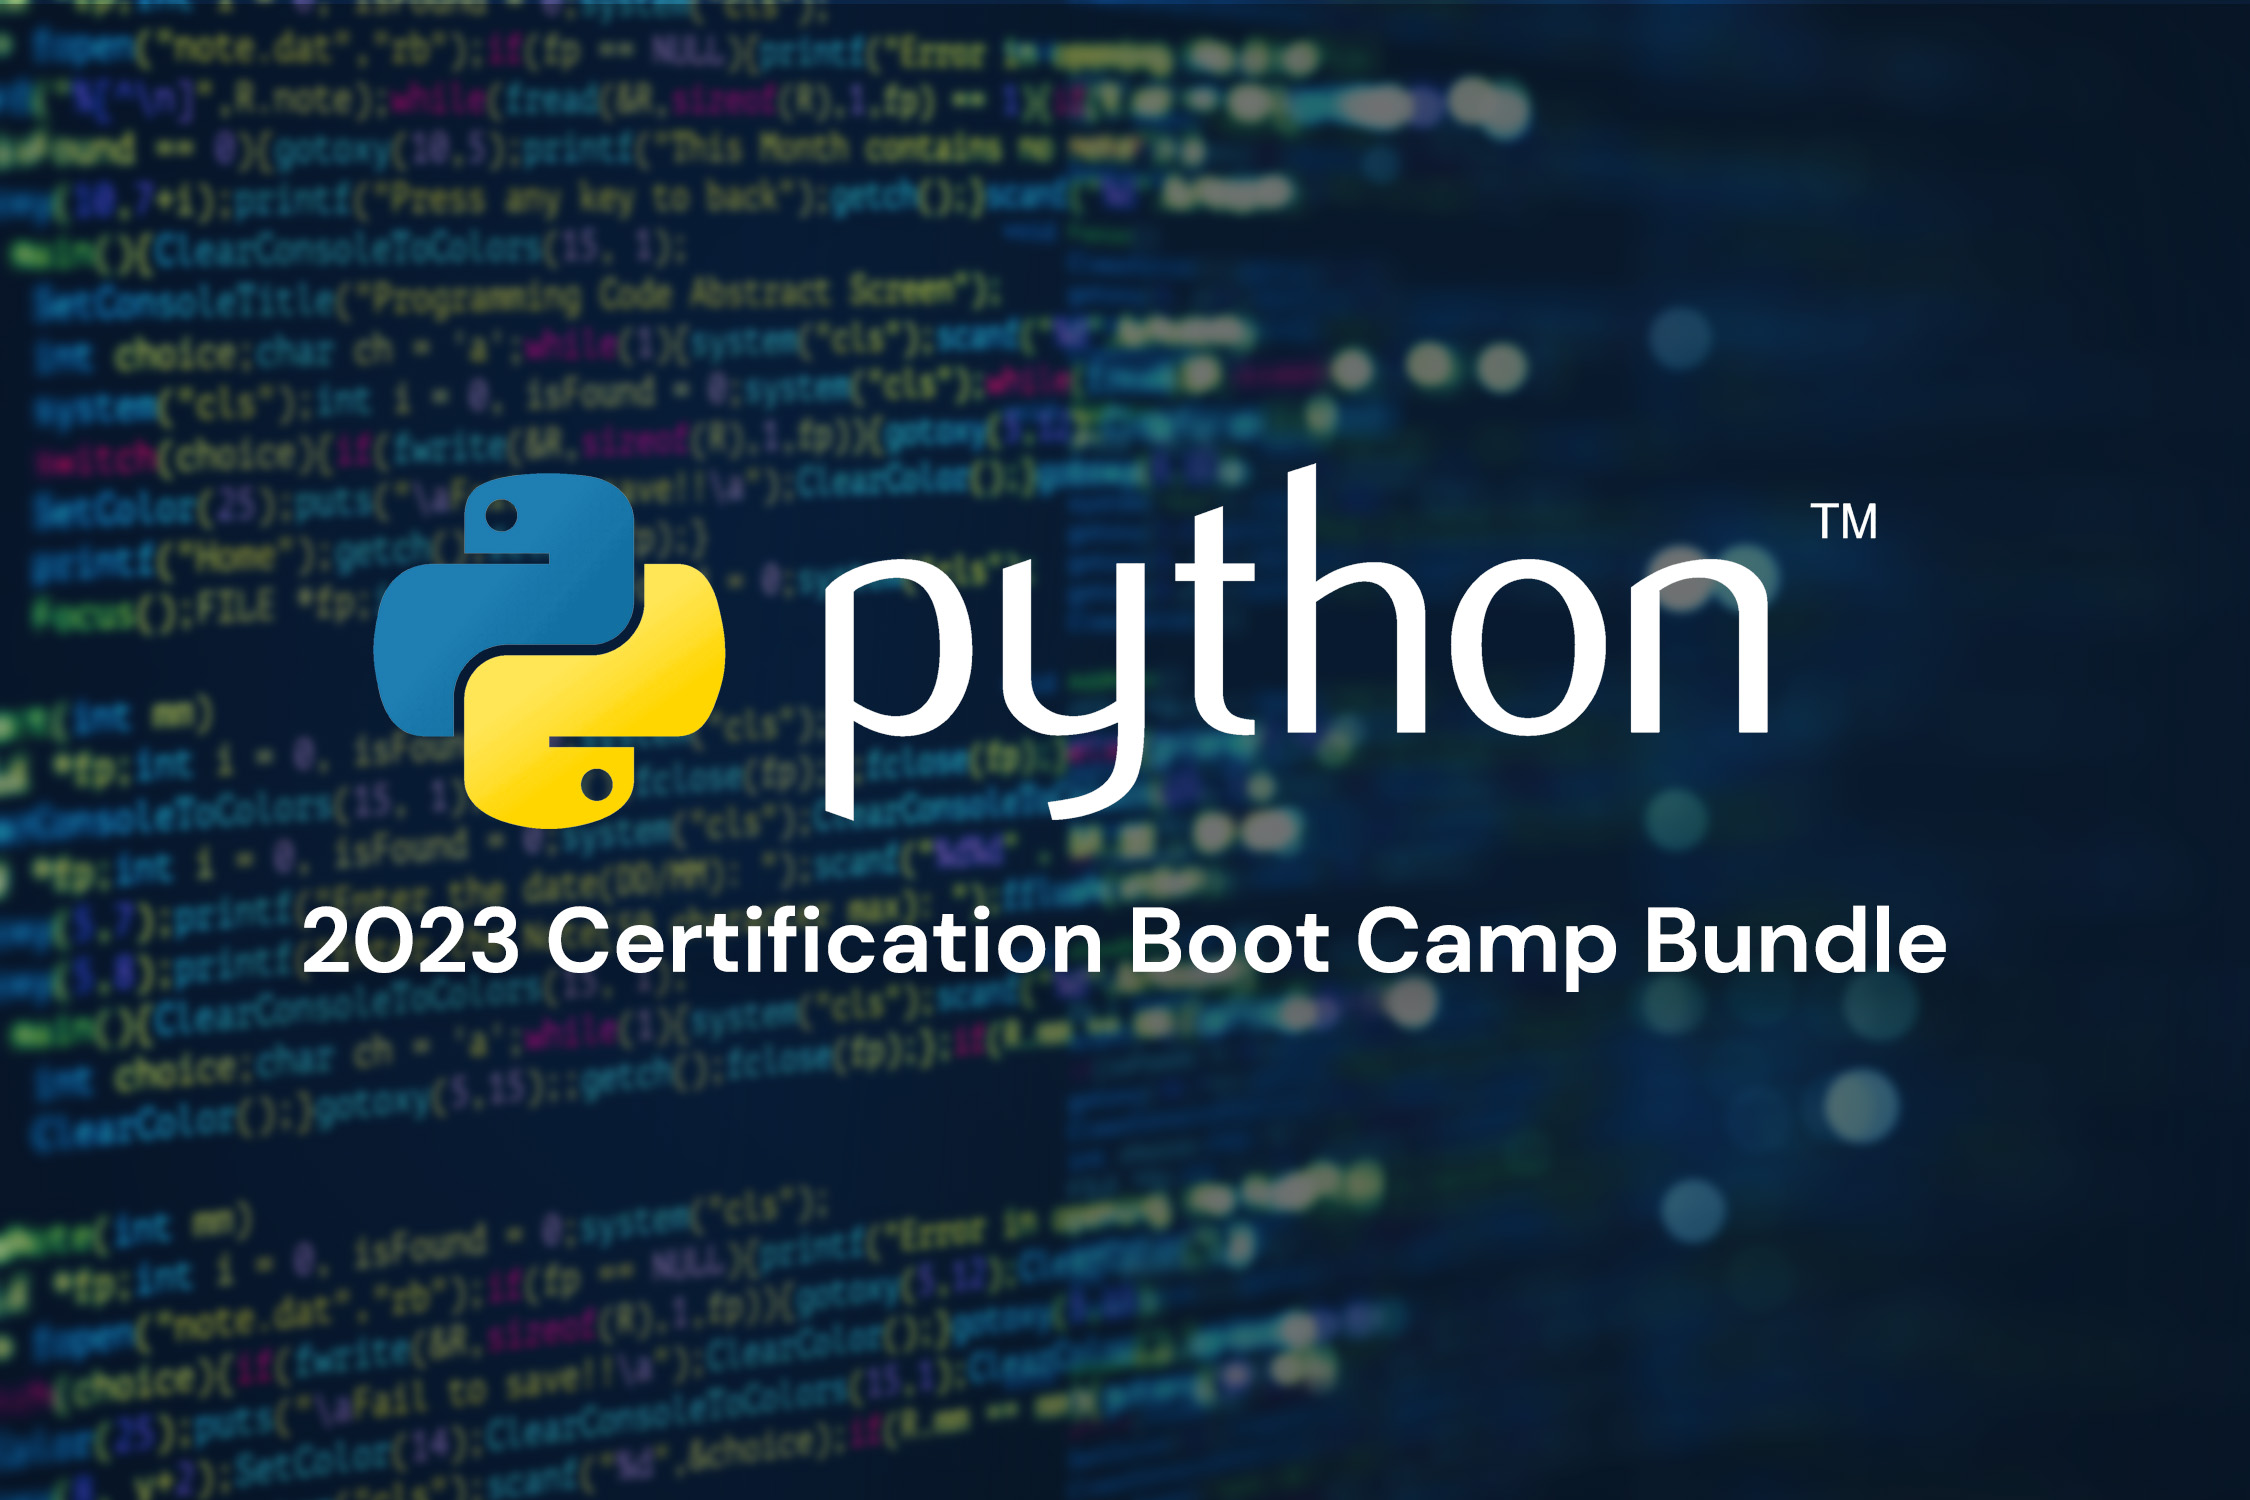 Save $74 on The 2023 Complete Python Certification Boot Camp Bundle during Cyber Monday